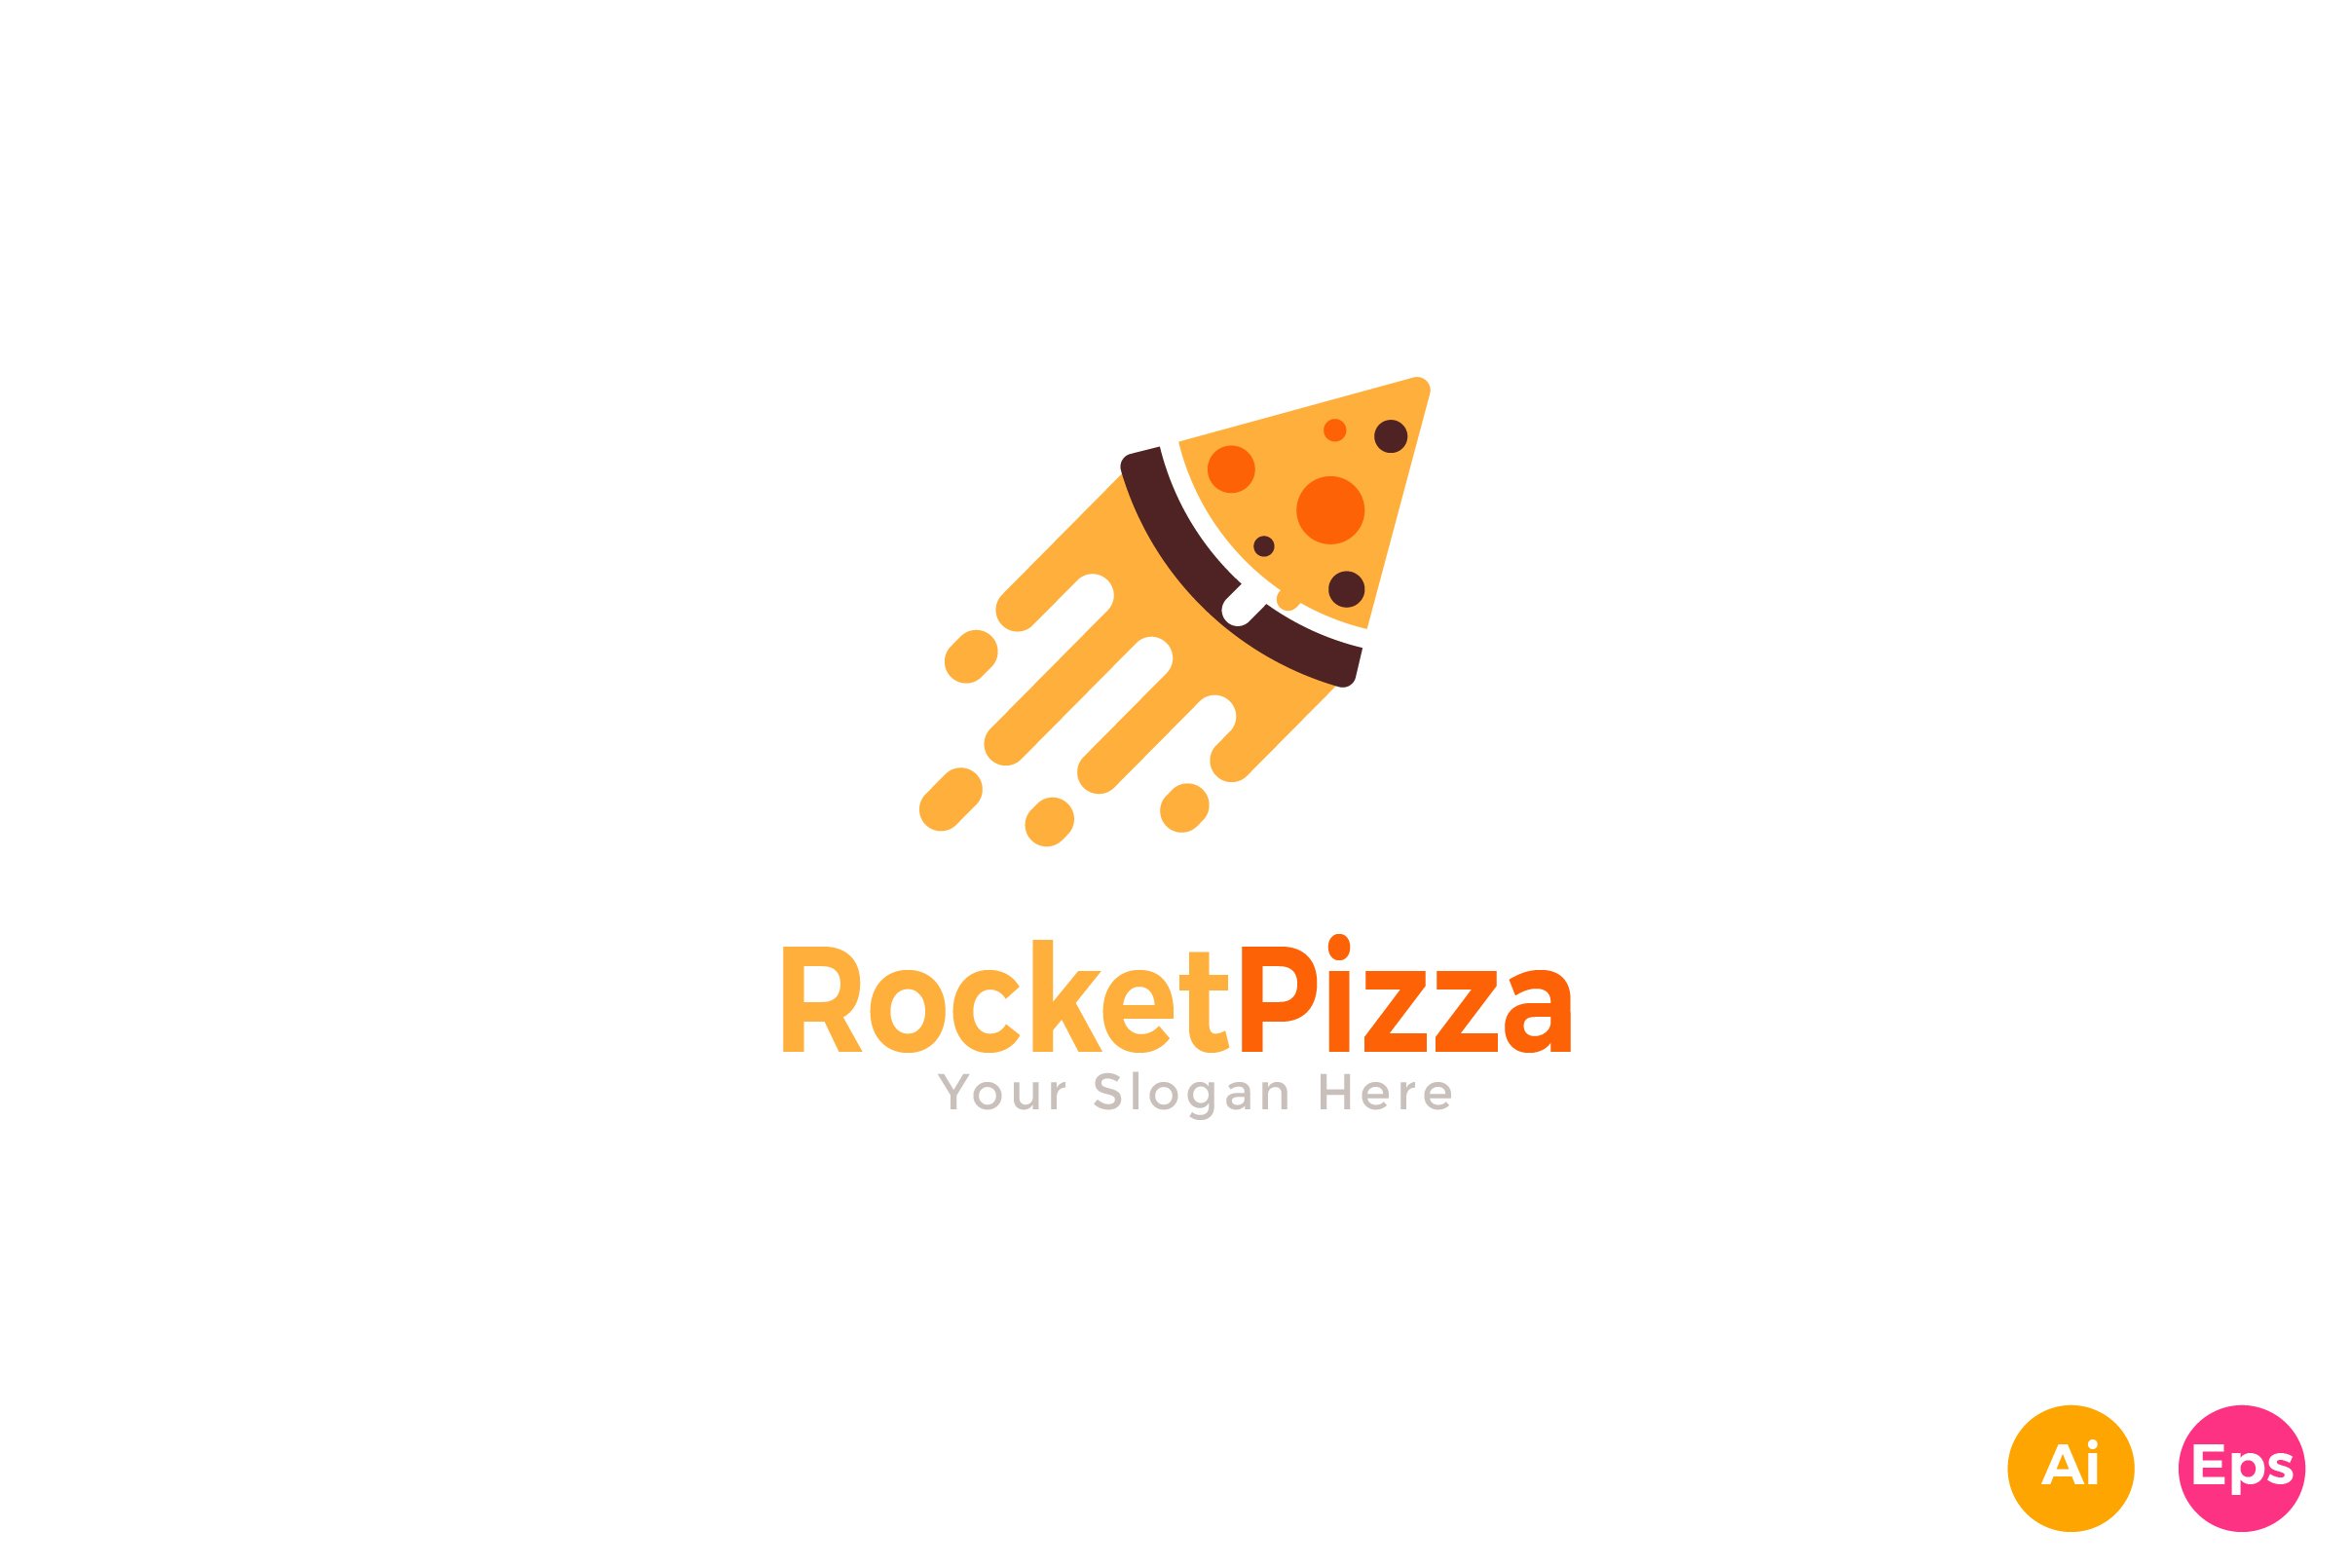 Rocket Pizza Food Logo Template cover image.